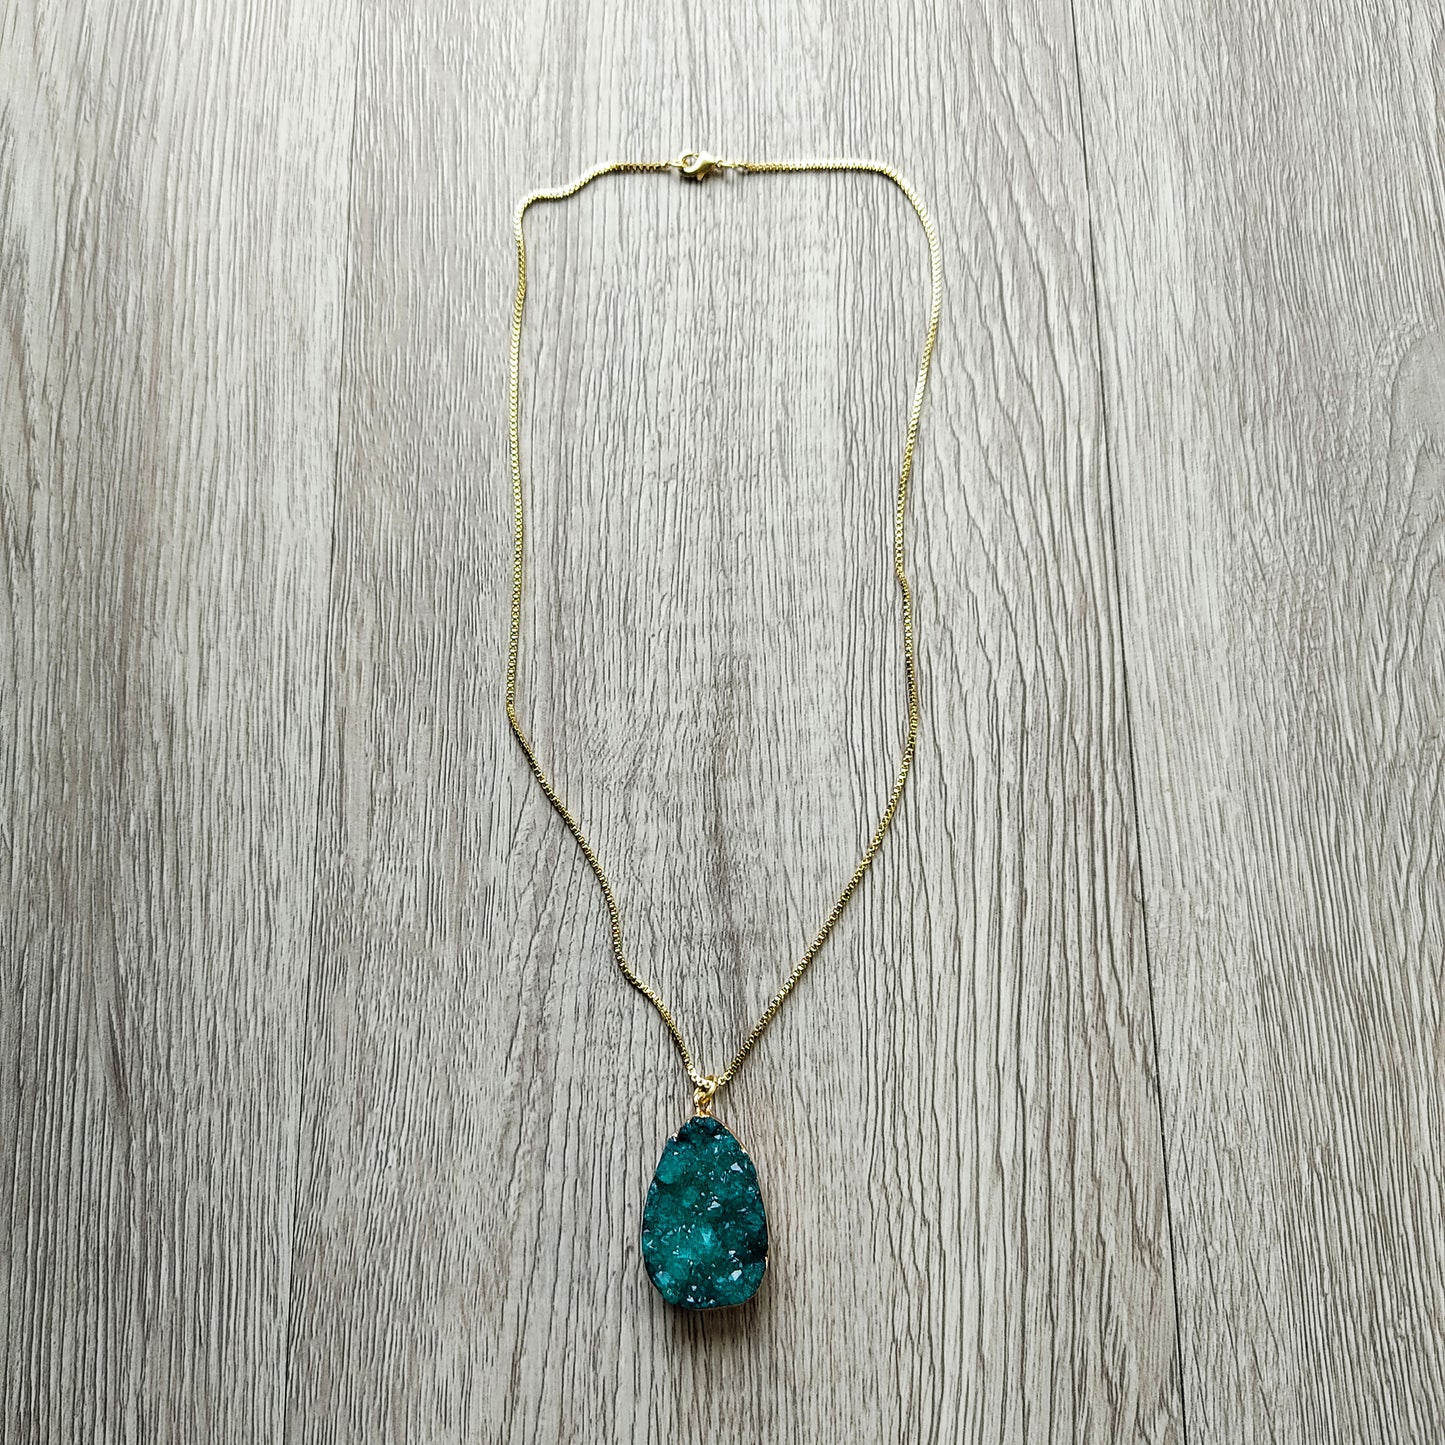 Ocean Blue Crystal Druzy Pendant 18" 14k Gold-plated Box Necklace Jewelry Gift